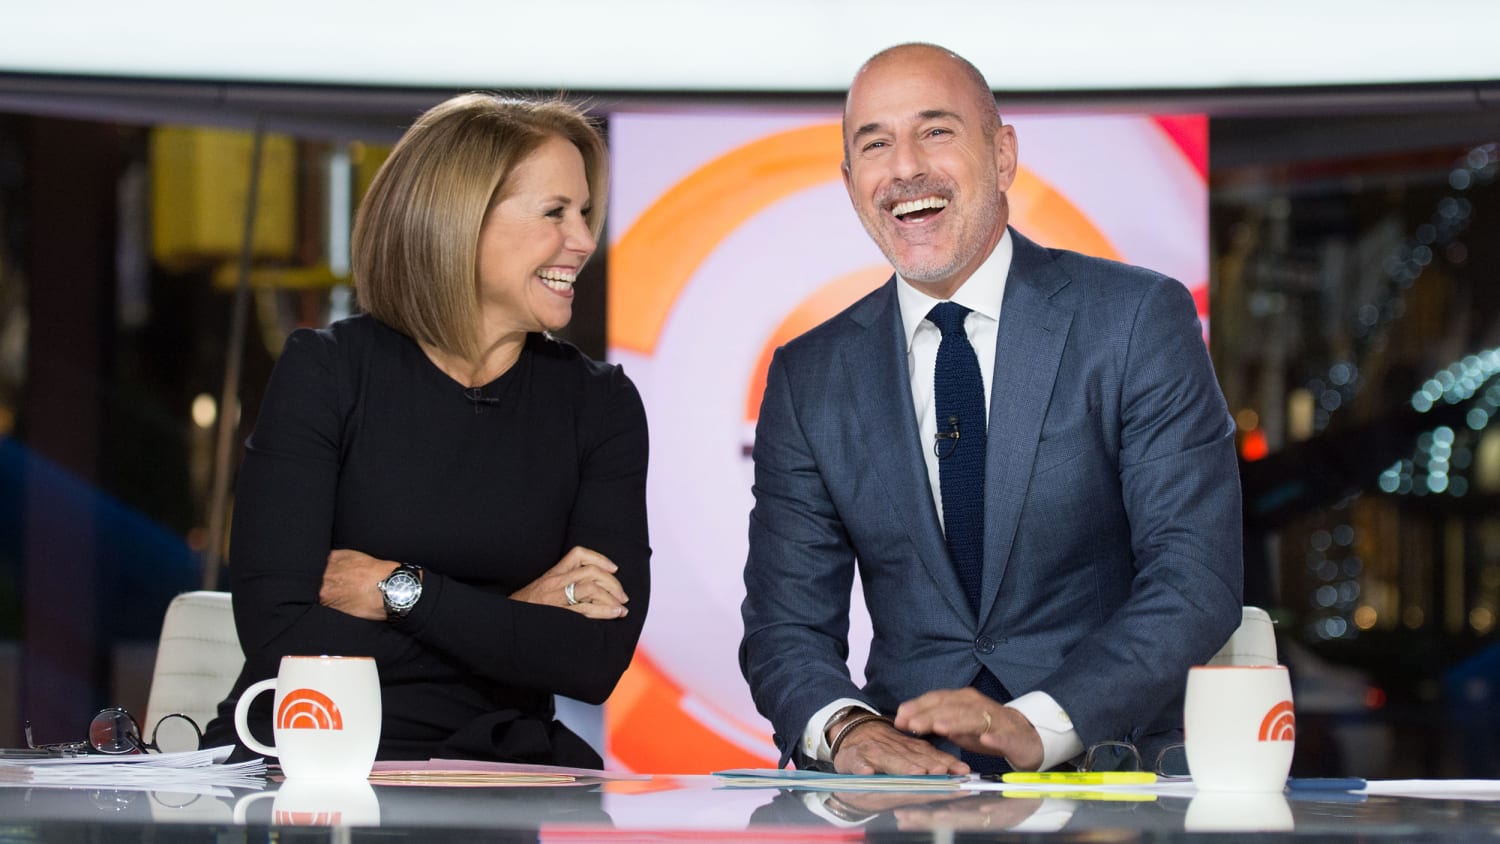 Katie couric today show